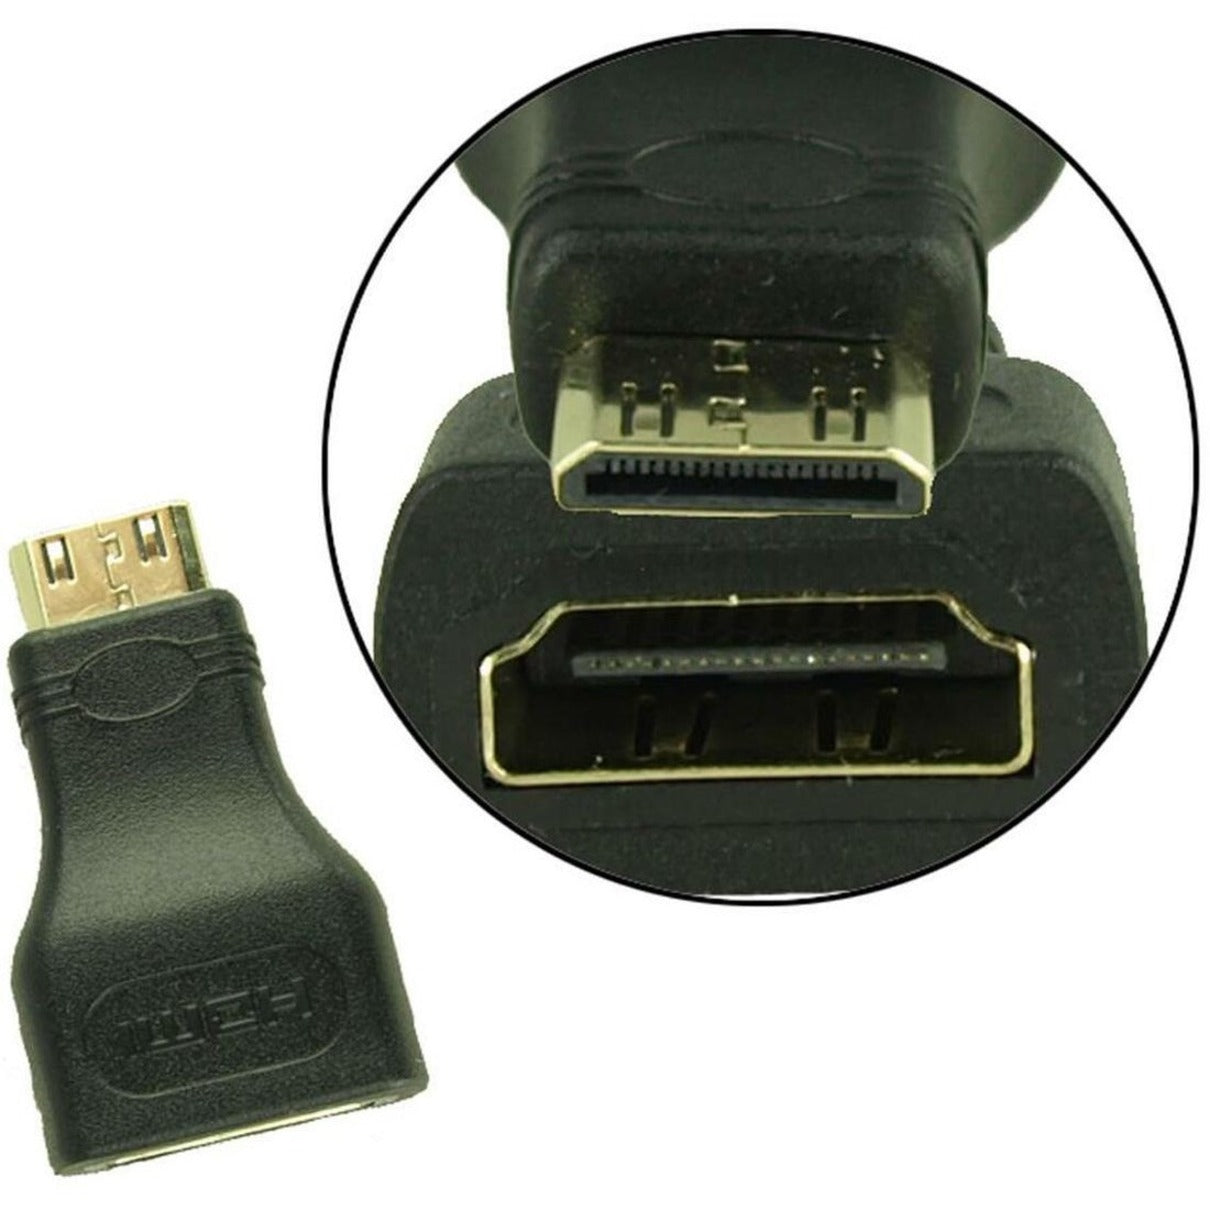 4XEM 4XHDMIMINI3FT 3FT Mini HDMI To HDMI M/M Adapter Cable, 10.2 Gbit/s Data Transfer Rate, Gold Plated Connectors